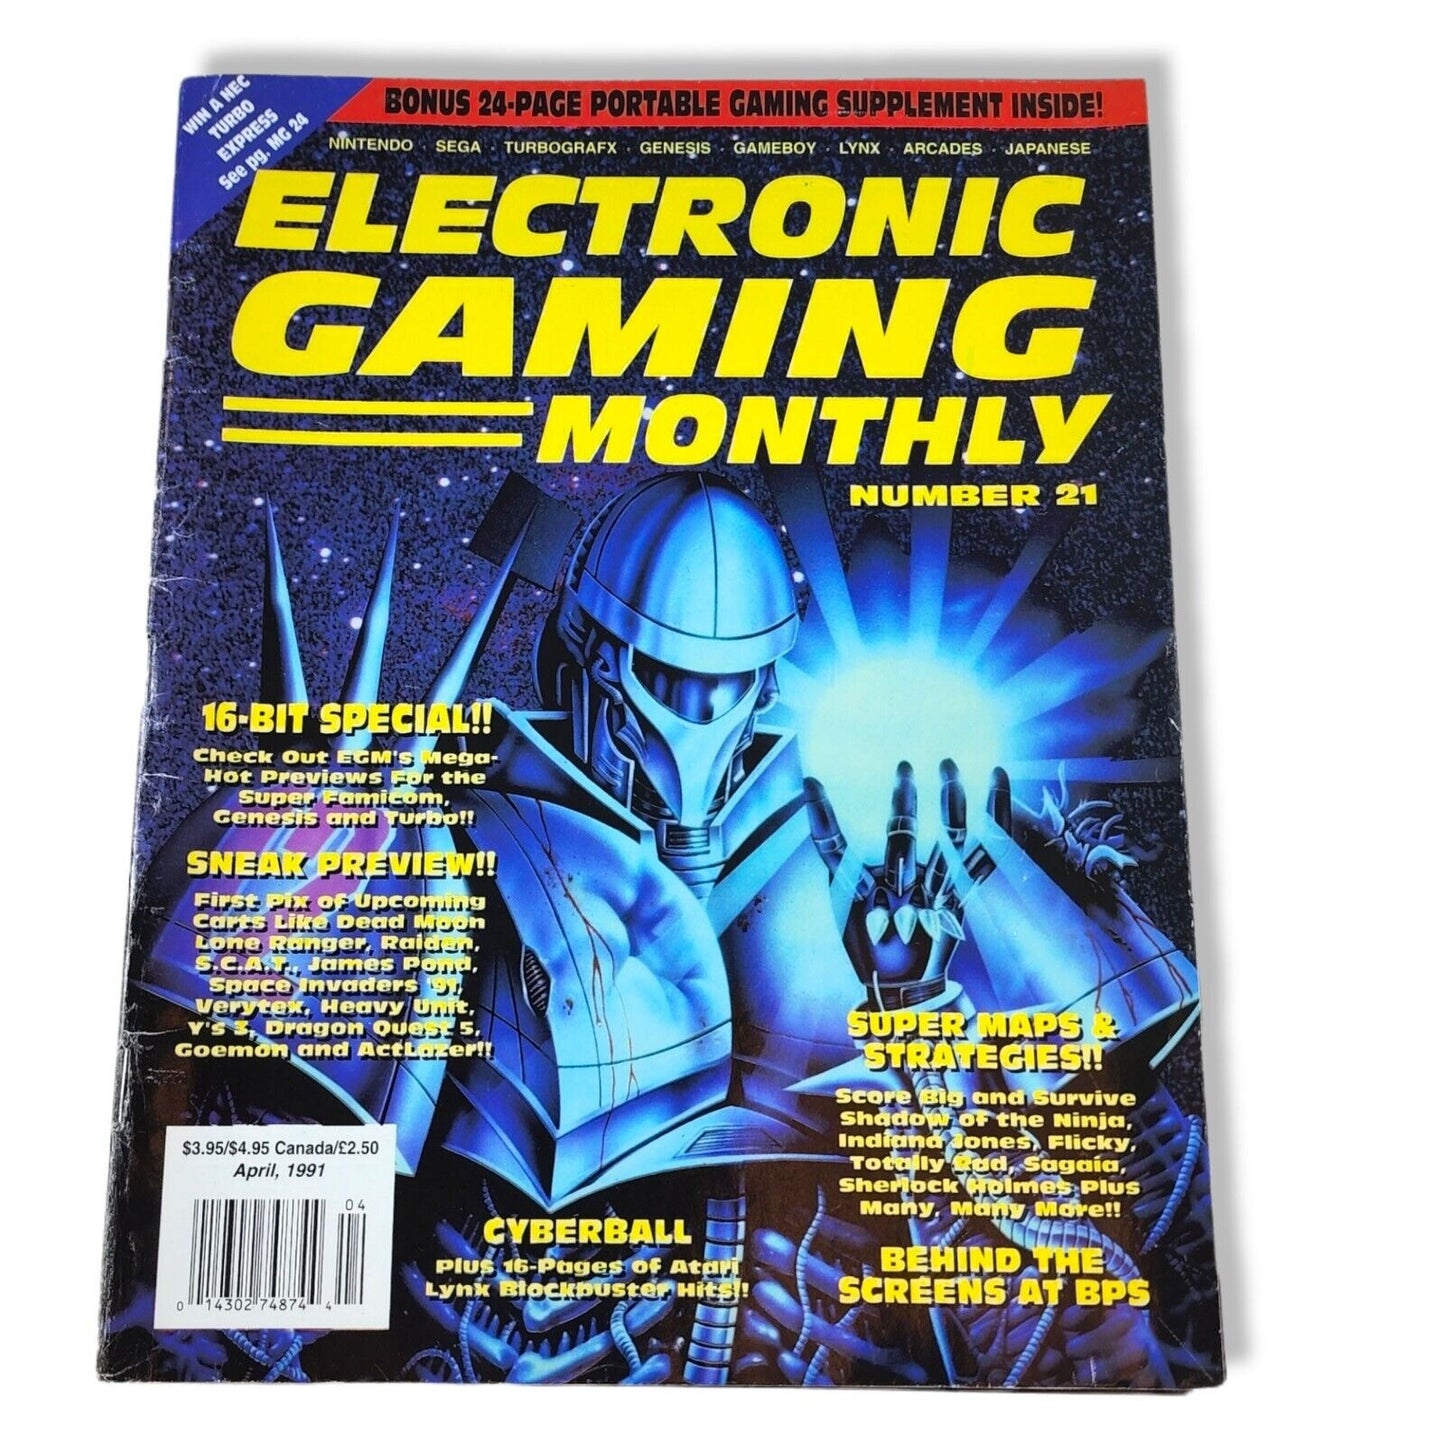 Electronic Gaming Monthly April 1991 Cyberball Bonus Supplement 107 pgs # 21